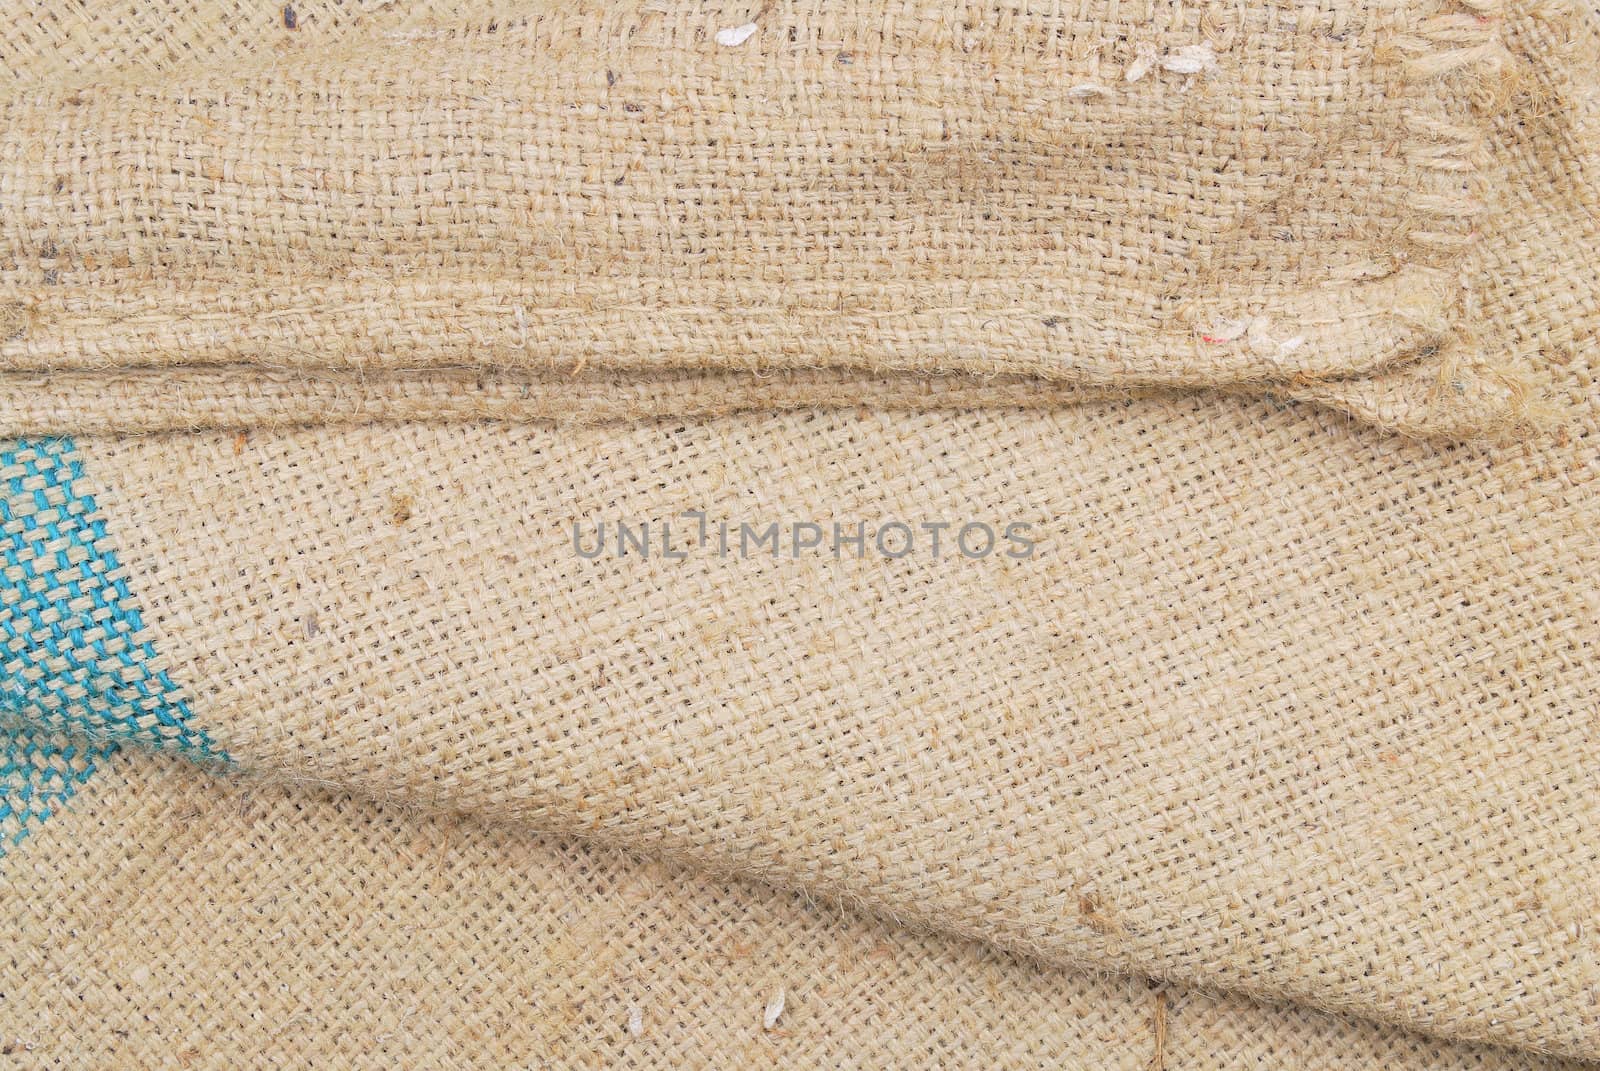 Gunny sack texture background by teen00000